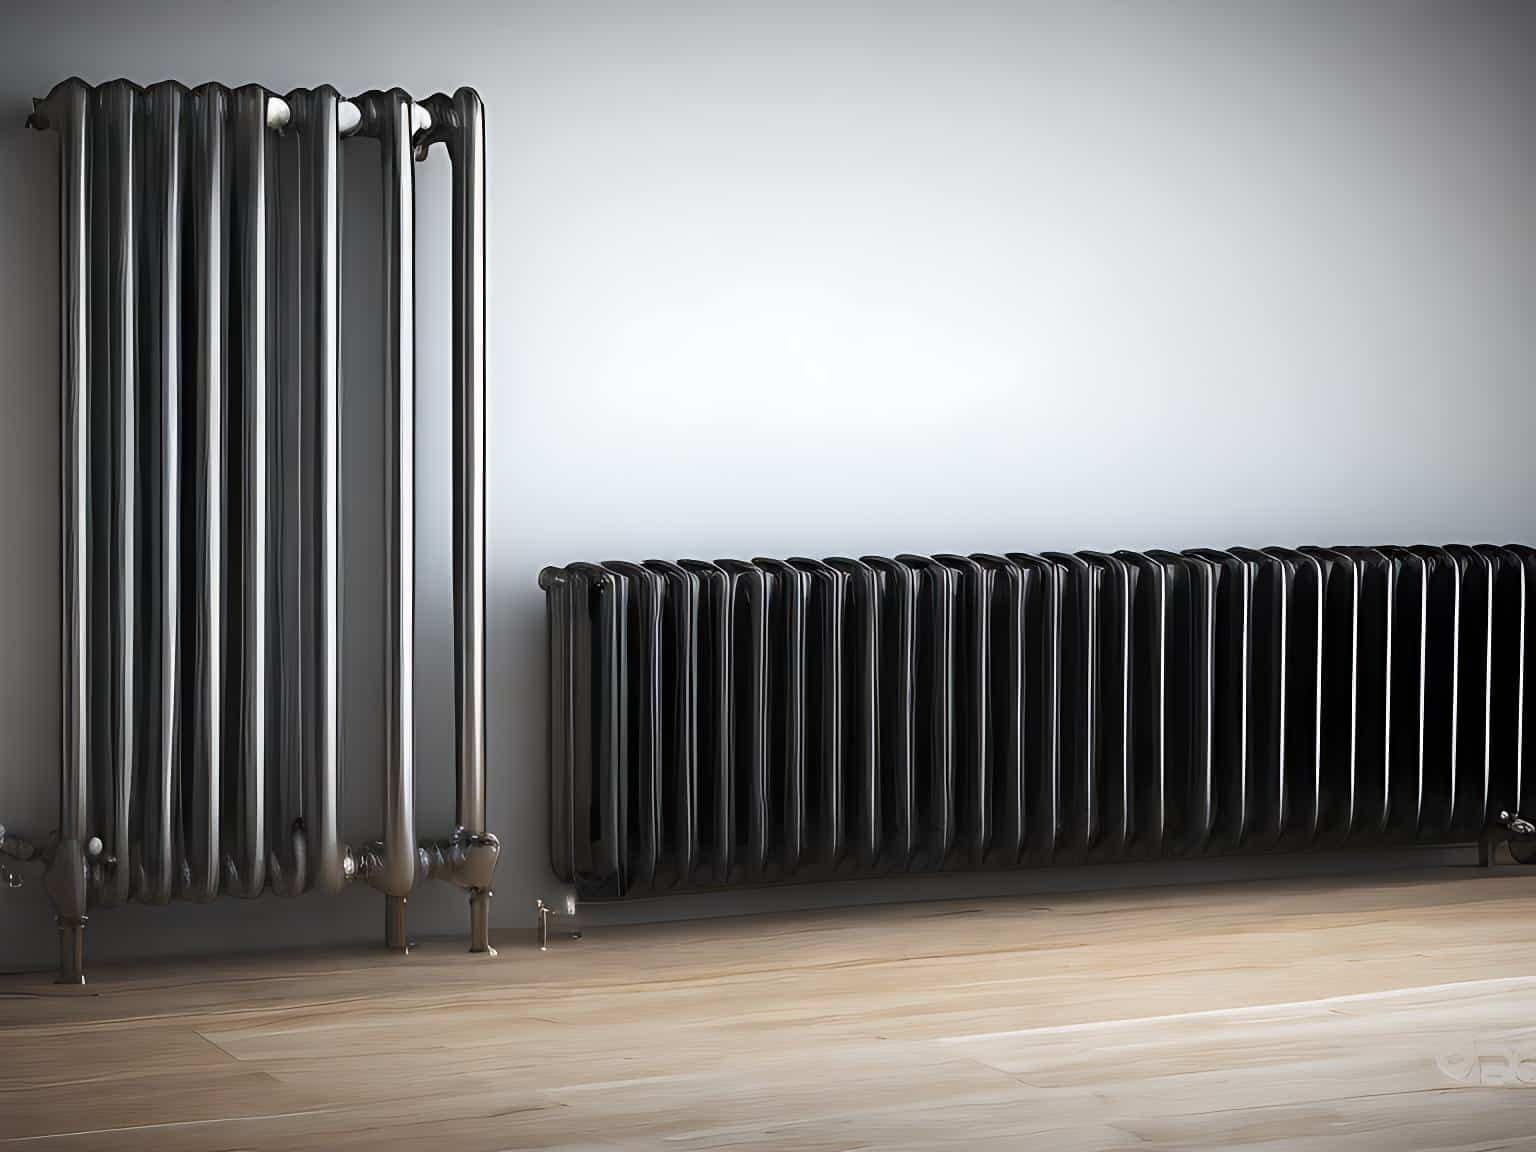 convector heater or oil filled radiator which is cheaper to run